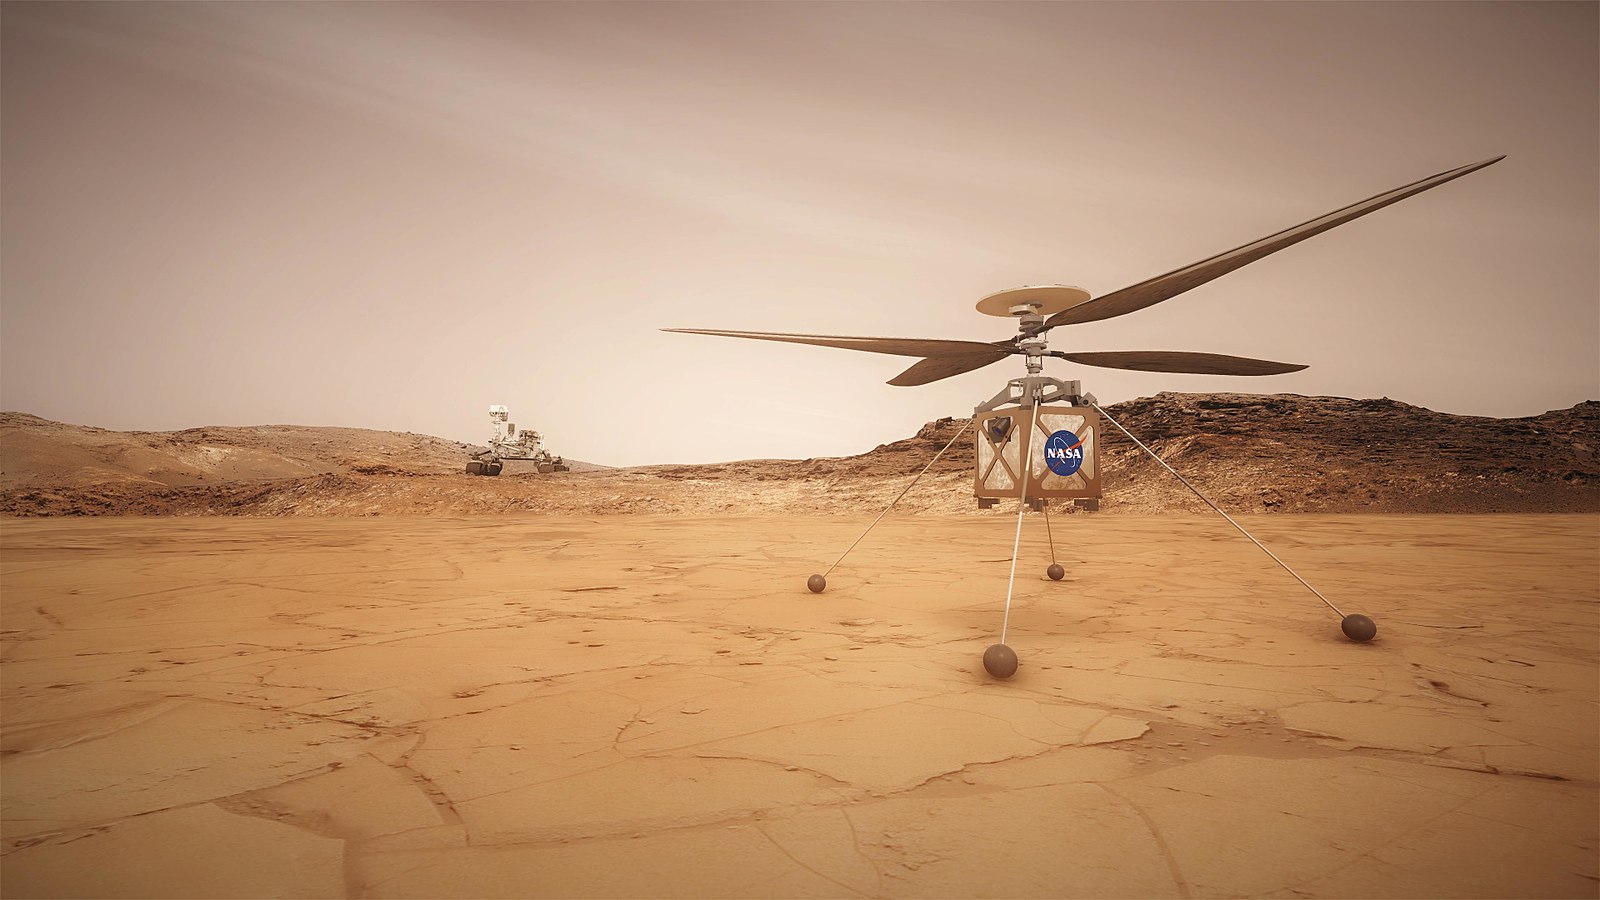 NASA will soon have a helicopter on the surface of Mars